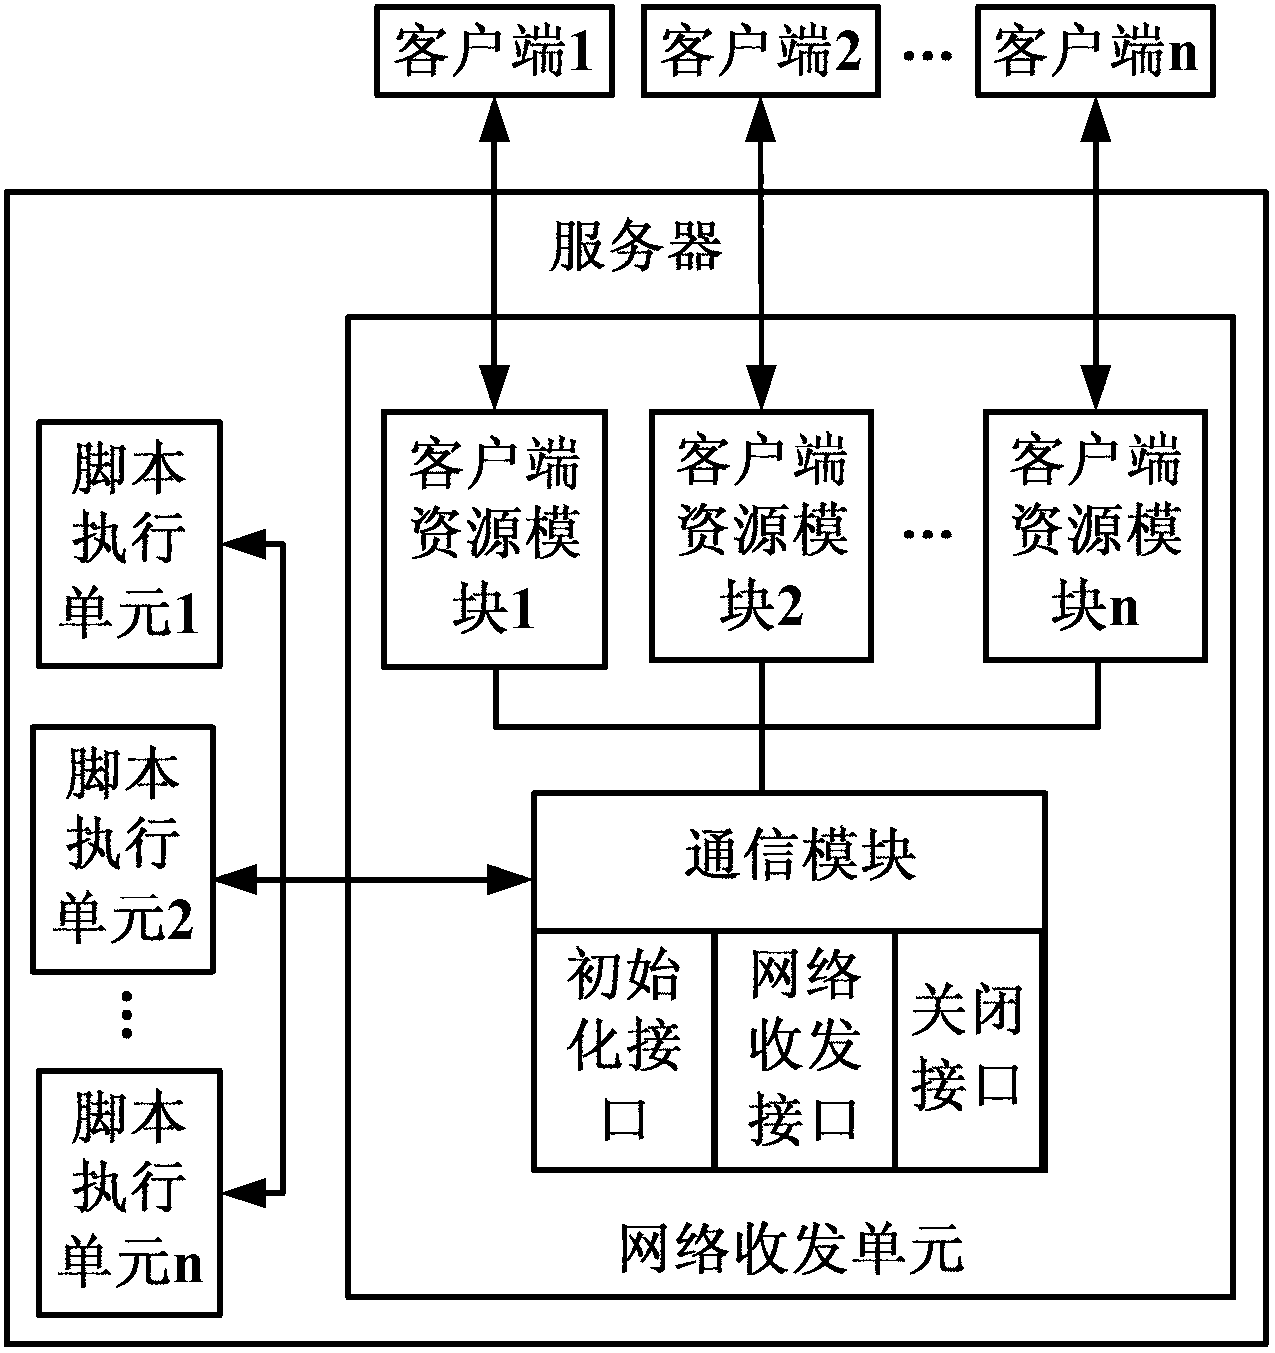 Method and system used for dynamic key network issue and interface control and based on script